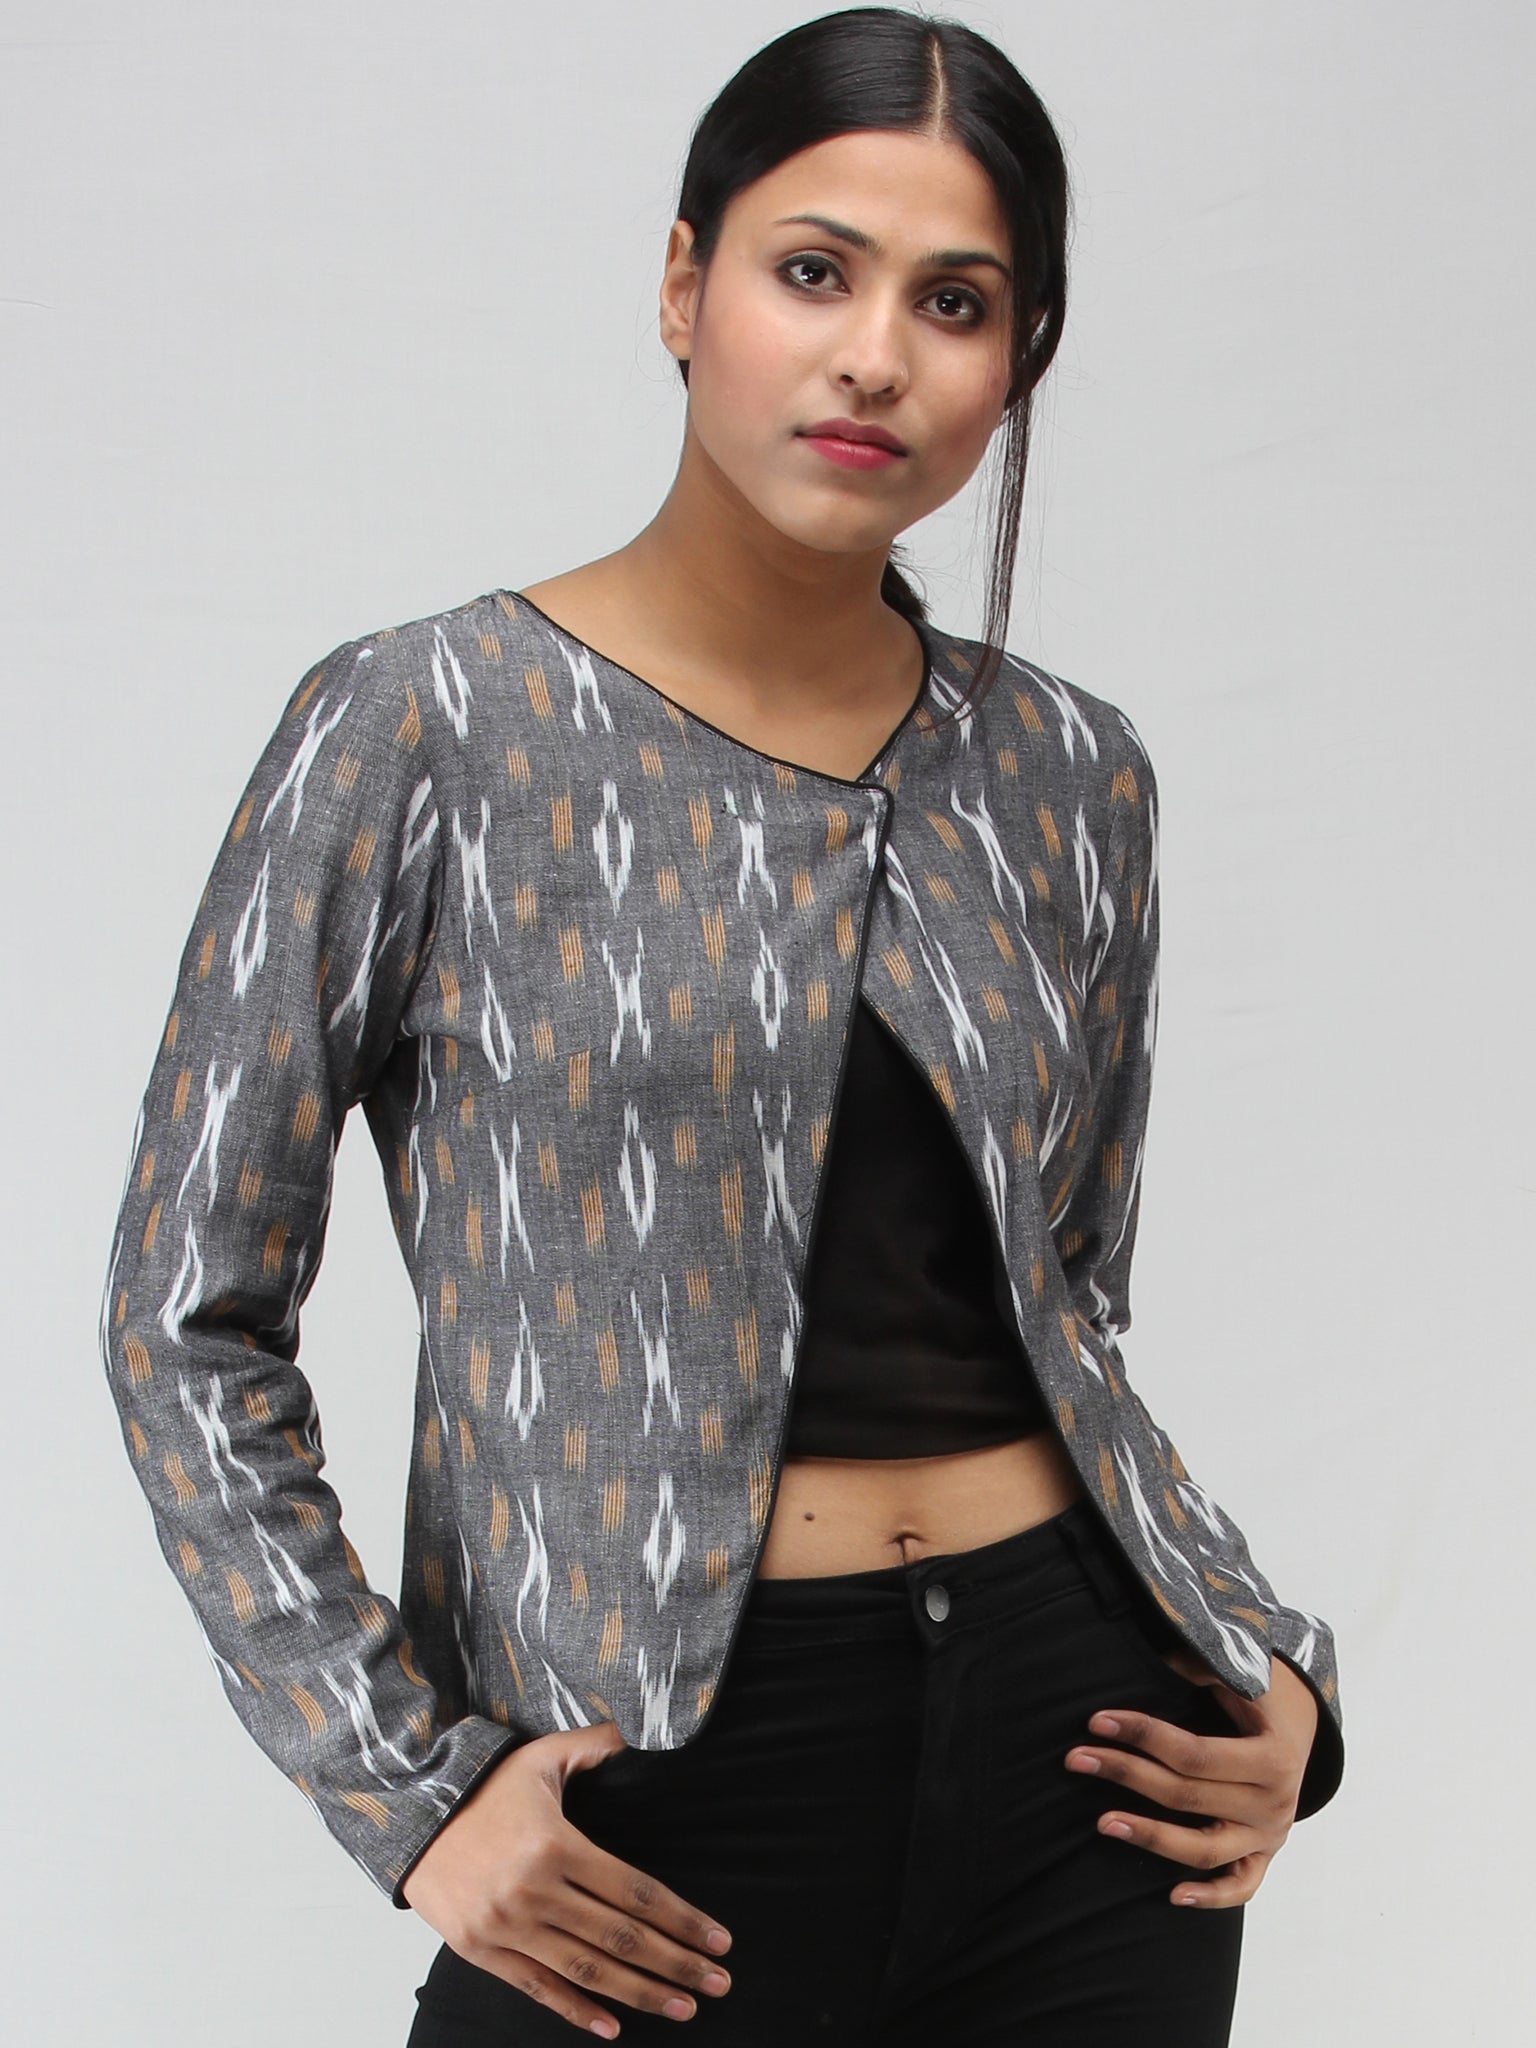 White ikat crop top with ash grey jacket by Desi Doree